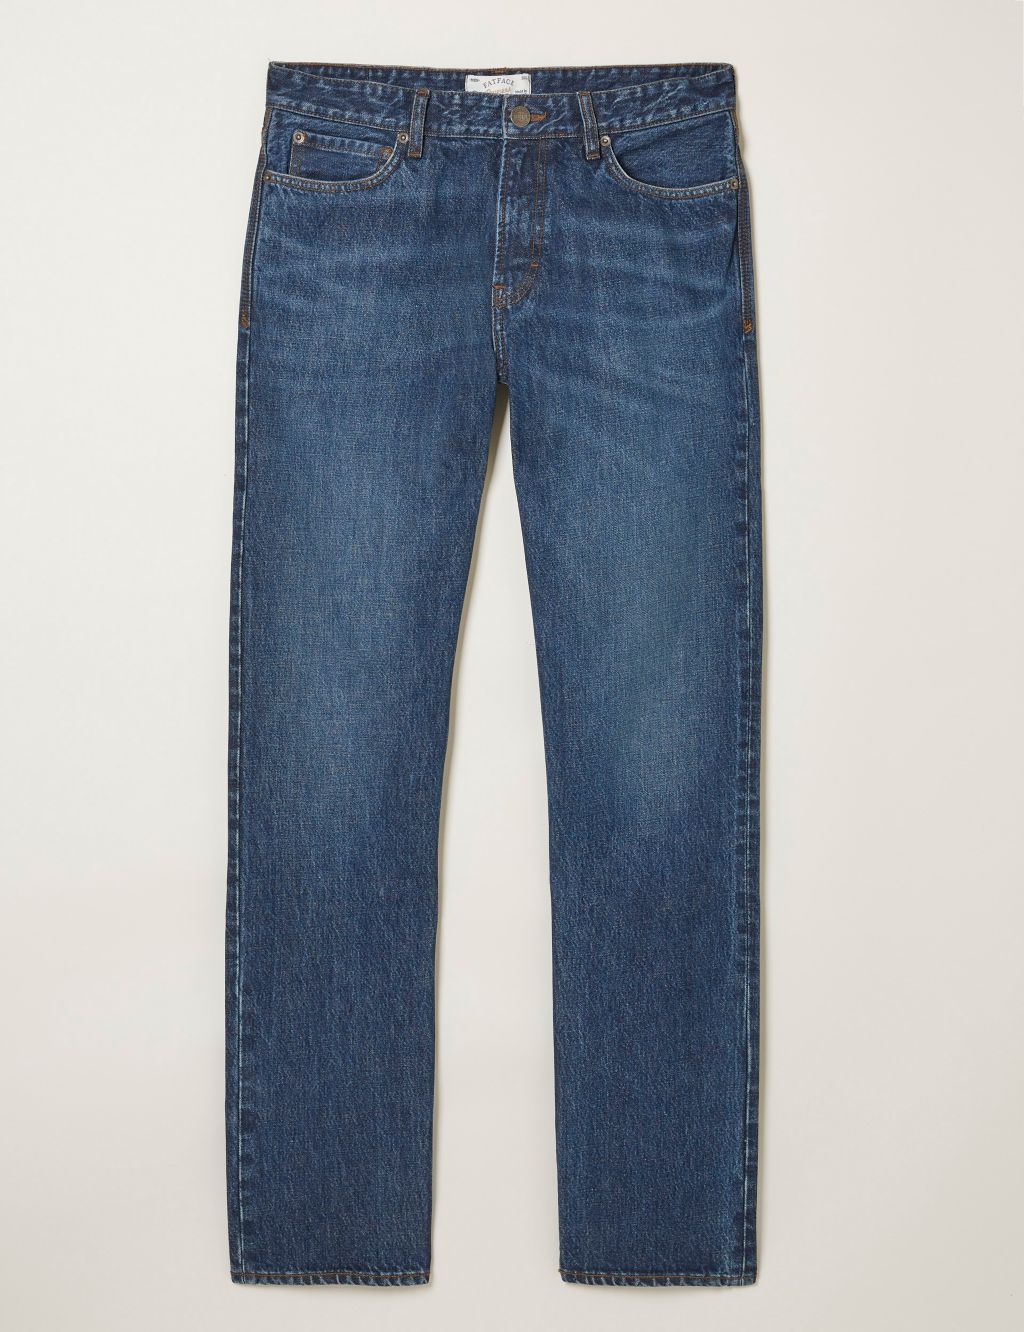 Straight Fit Pure Cotton 5 Pocket Jeans image 2